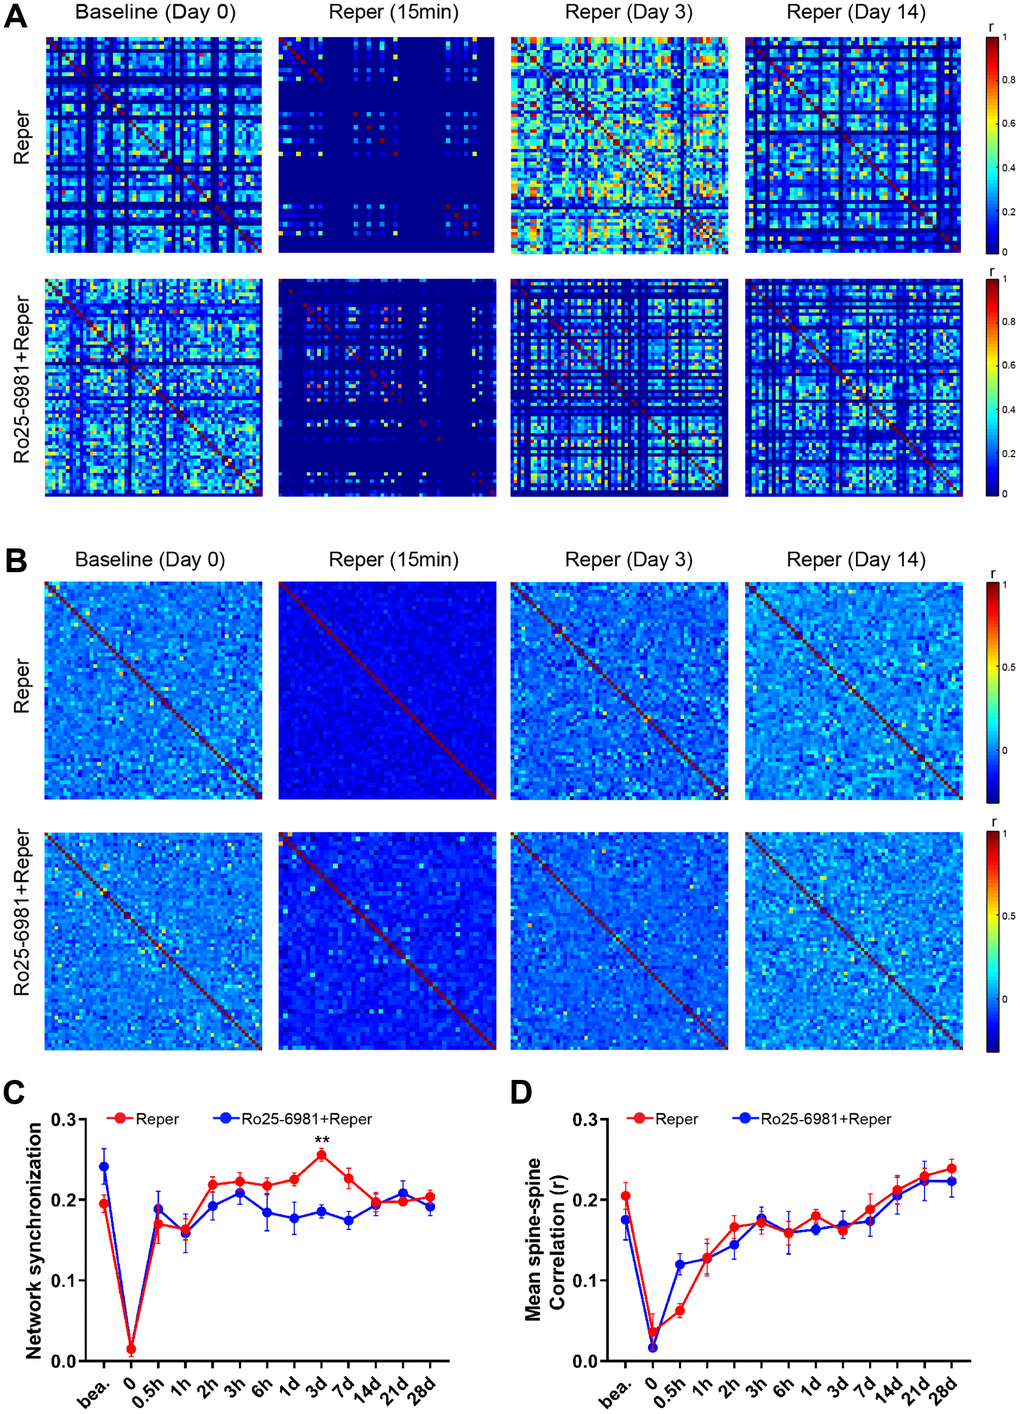 NMDA receptor blockade rescues BCAL induced network synchronization but not microcircuit dysfunction. (A) Raster plots depicting changes in activity (ΔF/F) over time for a representative correlation matrices quantifying network synchronization between each spine and every other (B) Representative correlation matrices quantifying functional connectivity between each spine and every other spine. (C, D) The in network synchronization and mean spine-spine correlation on the 3rd day after reperfusion. n= 1044 spines in 6 Reper mice, n= 824 spines in 4 Ro25-6981-treated mice. **P 